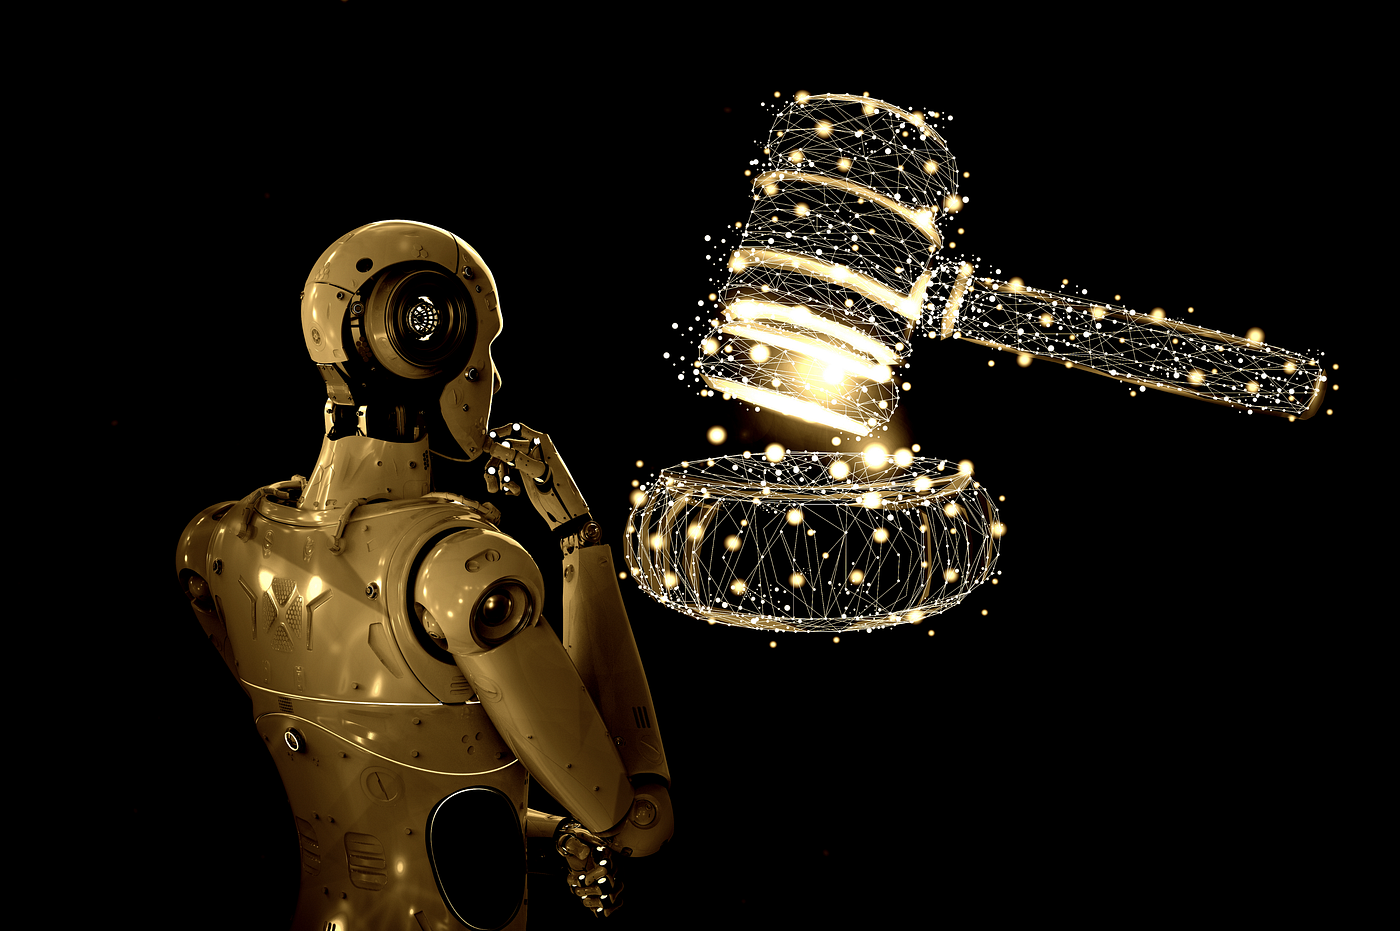 Will AI Ever Enter the Courtroom? | by Tannya D. Jajal | Mapping Out 2050 |  Medium